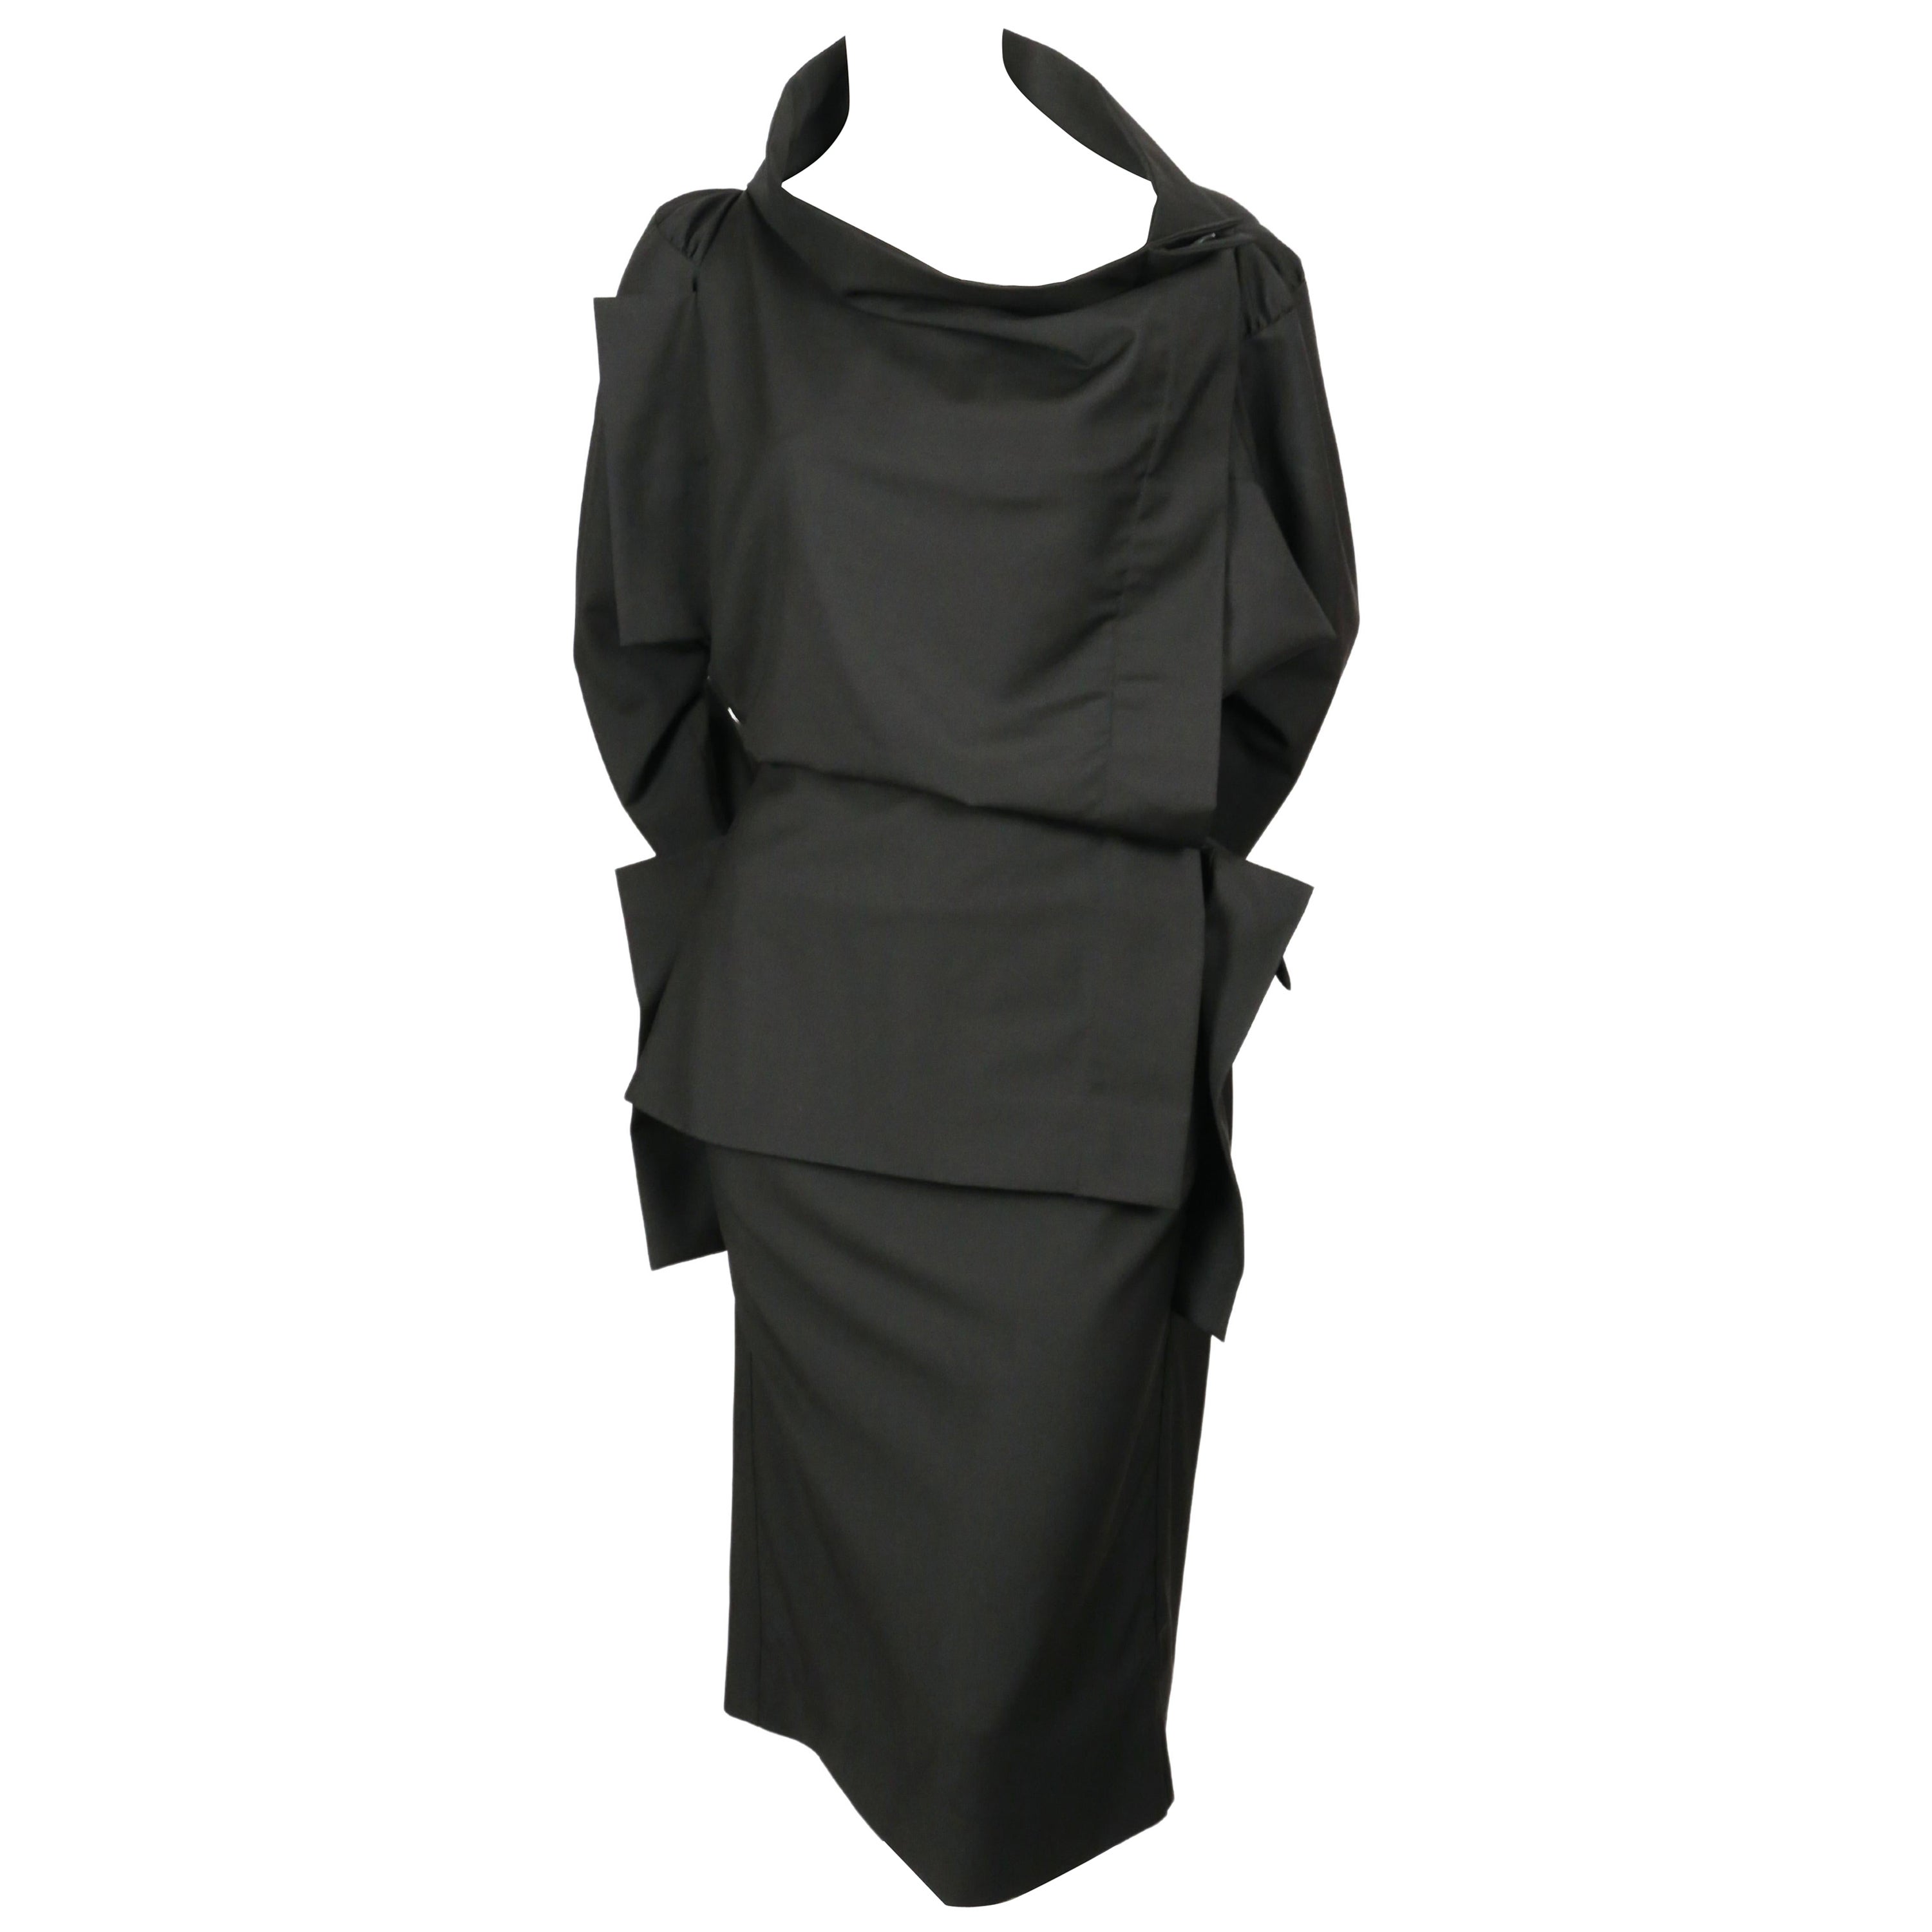 VIVIENNE WESTWOOD black draped top and skirt suit For Sale